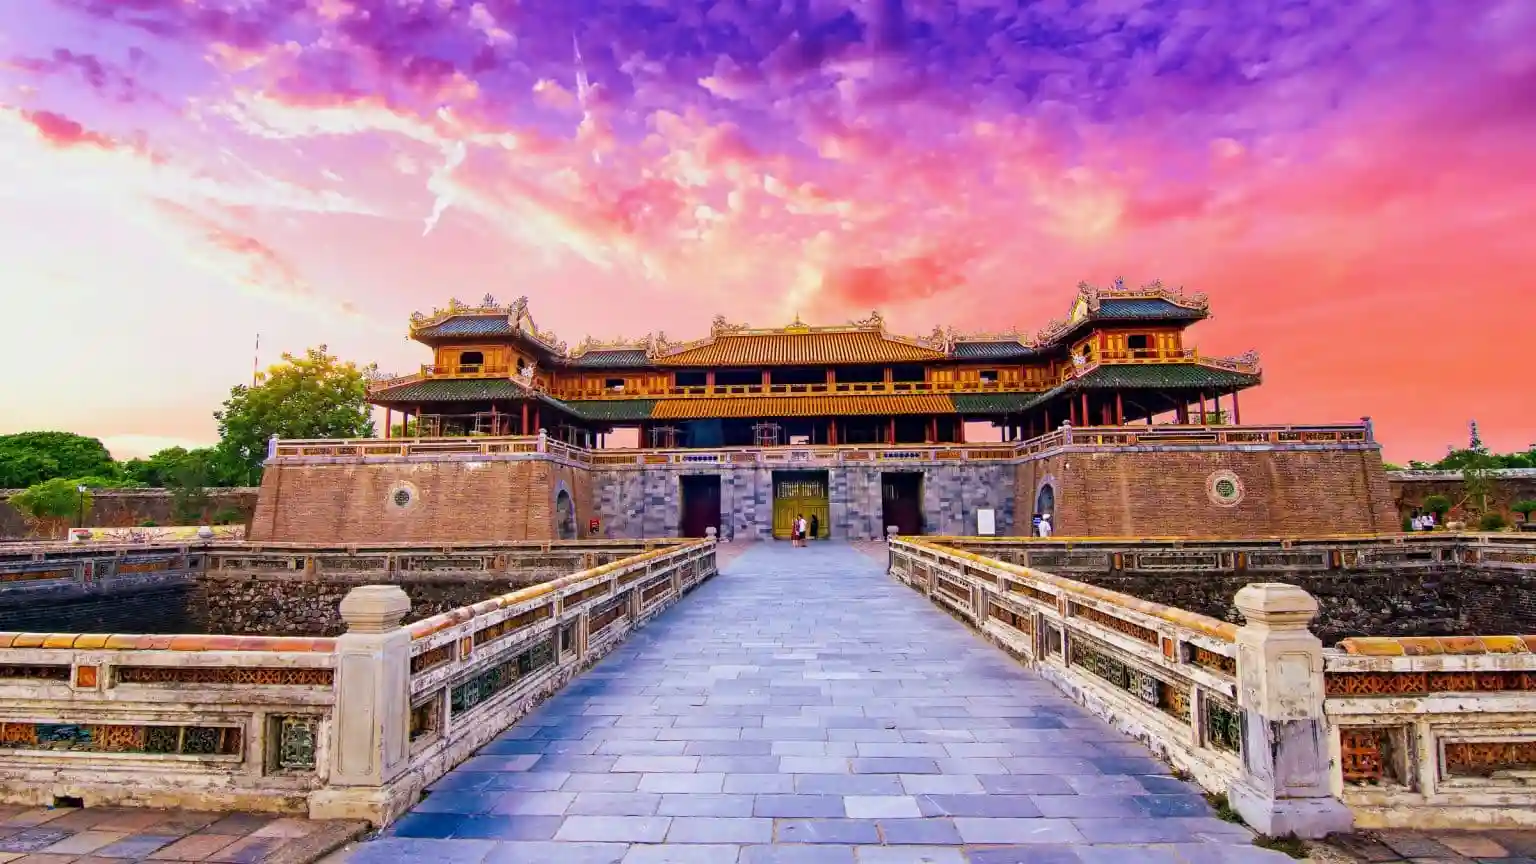 Hue: The Imperial City